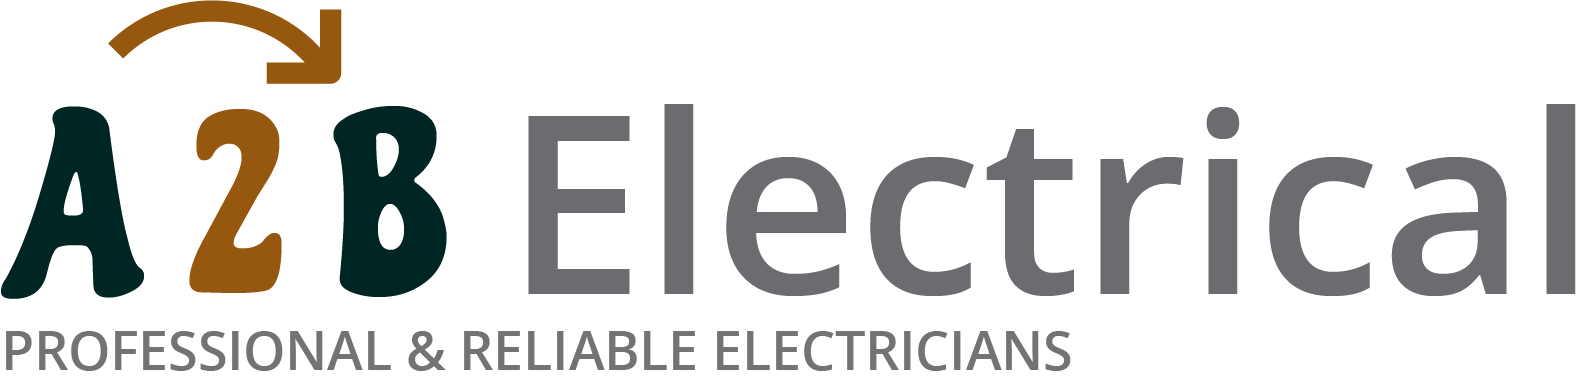 If you have electrical wiring problems in Kilburn, we can provide an electrician to have a look for you. 